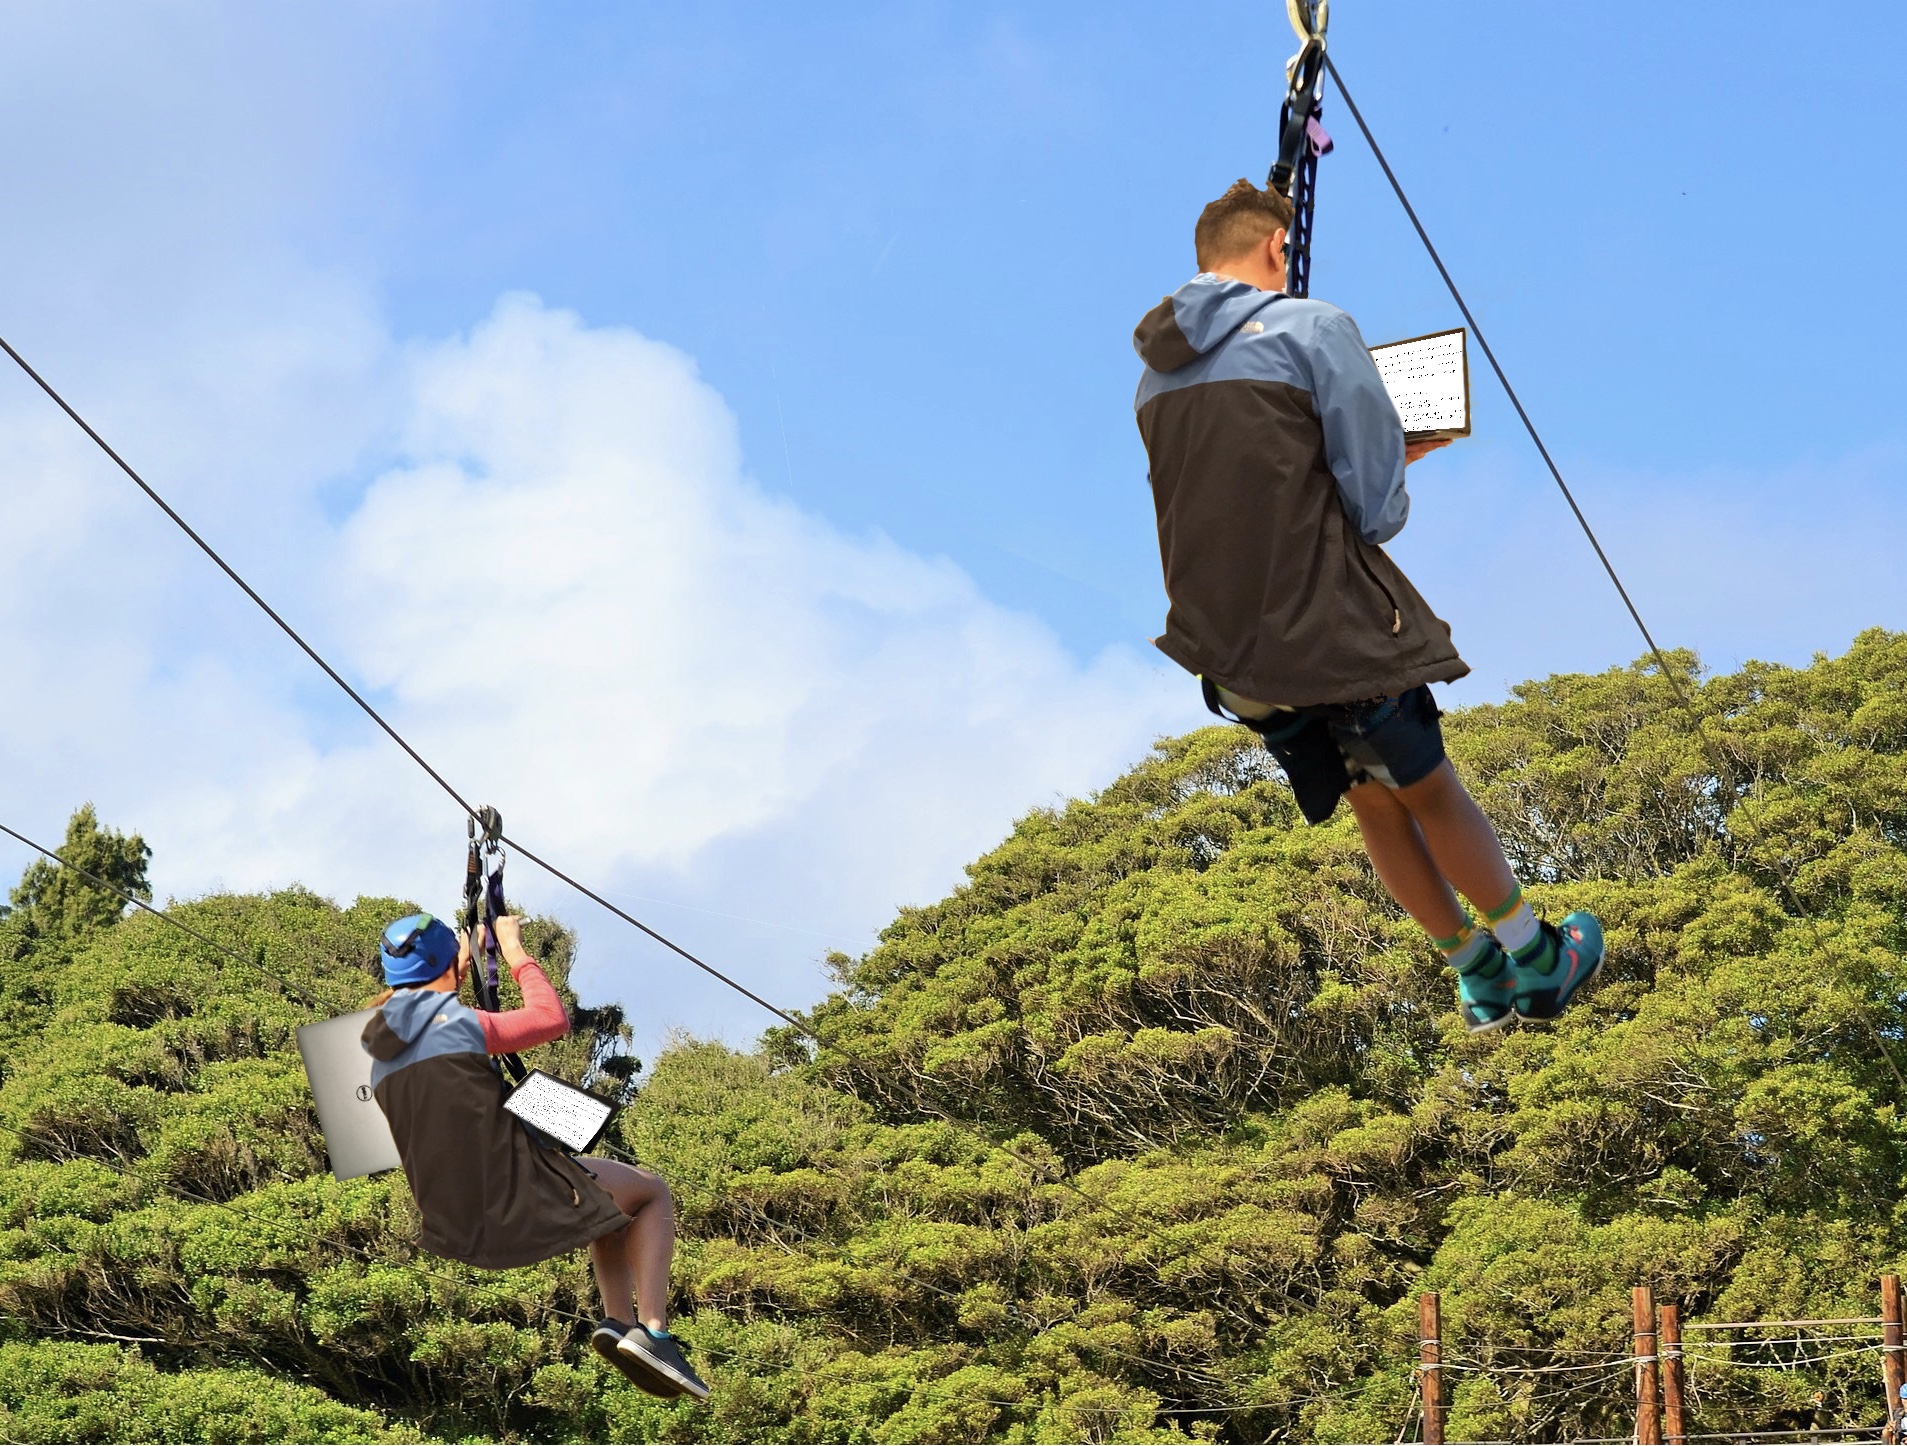 Ziplining While Coding in Braille